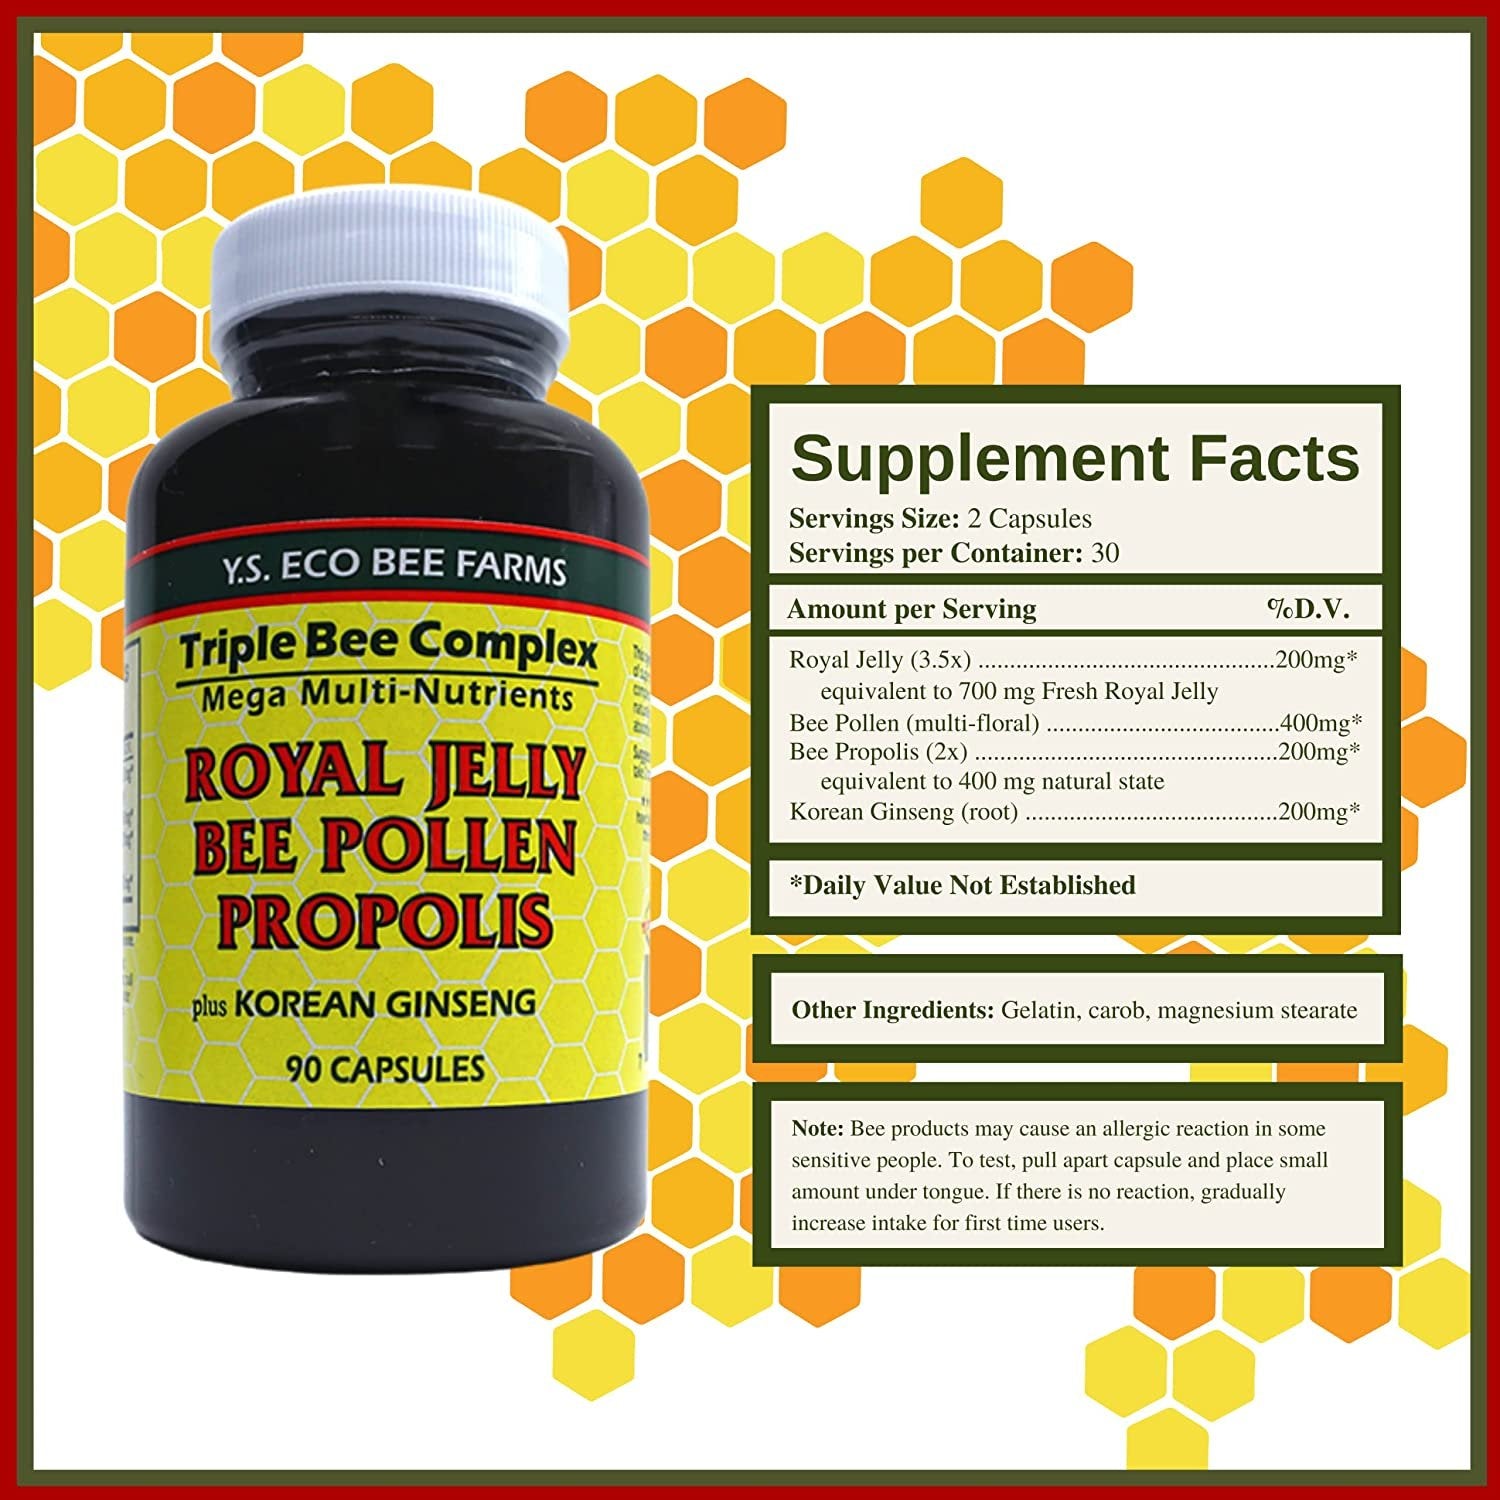 Y.S. Eco Bee Farms Triple Bee Complex Royal Jelly Bee Pollen Propolis Plus Korean Ginseng - Health and Wellness Organic Bee Pollen Supplement - 90 Ct with Worldwide Nutrition Multi Purpose Key Chain